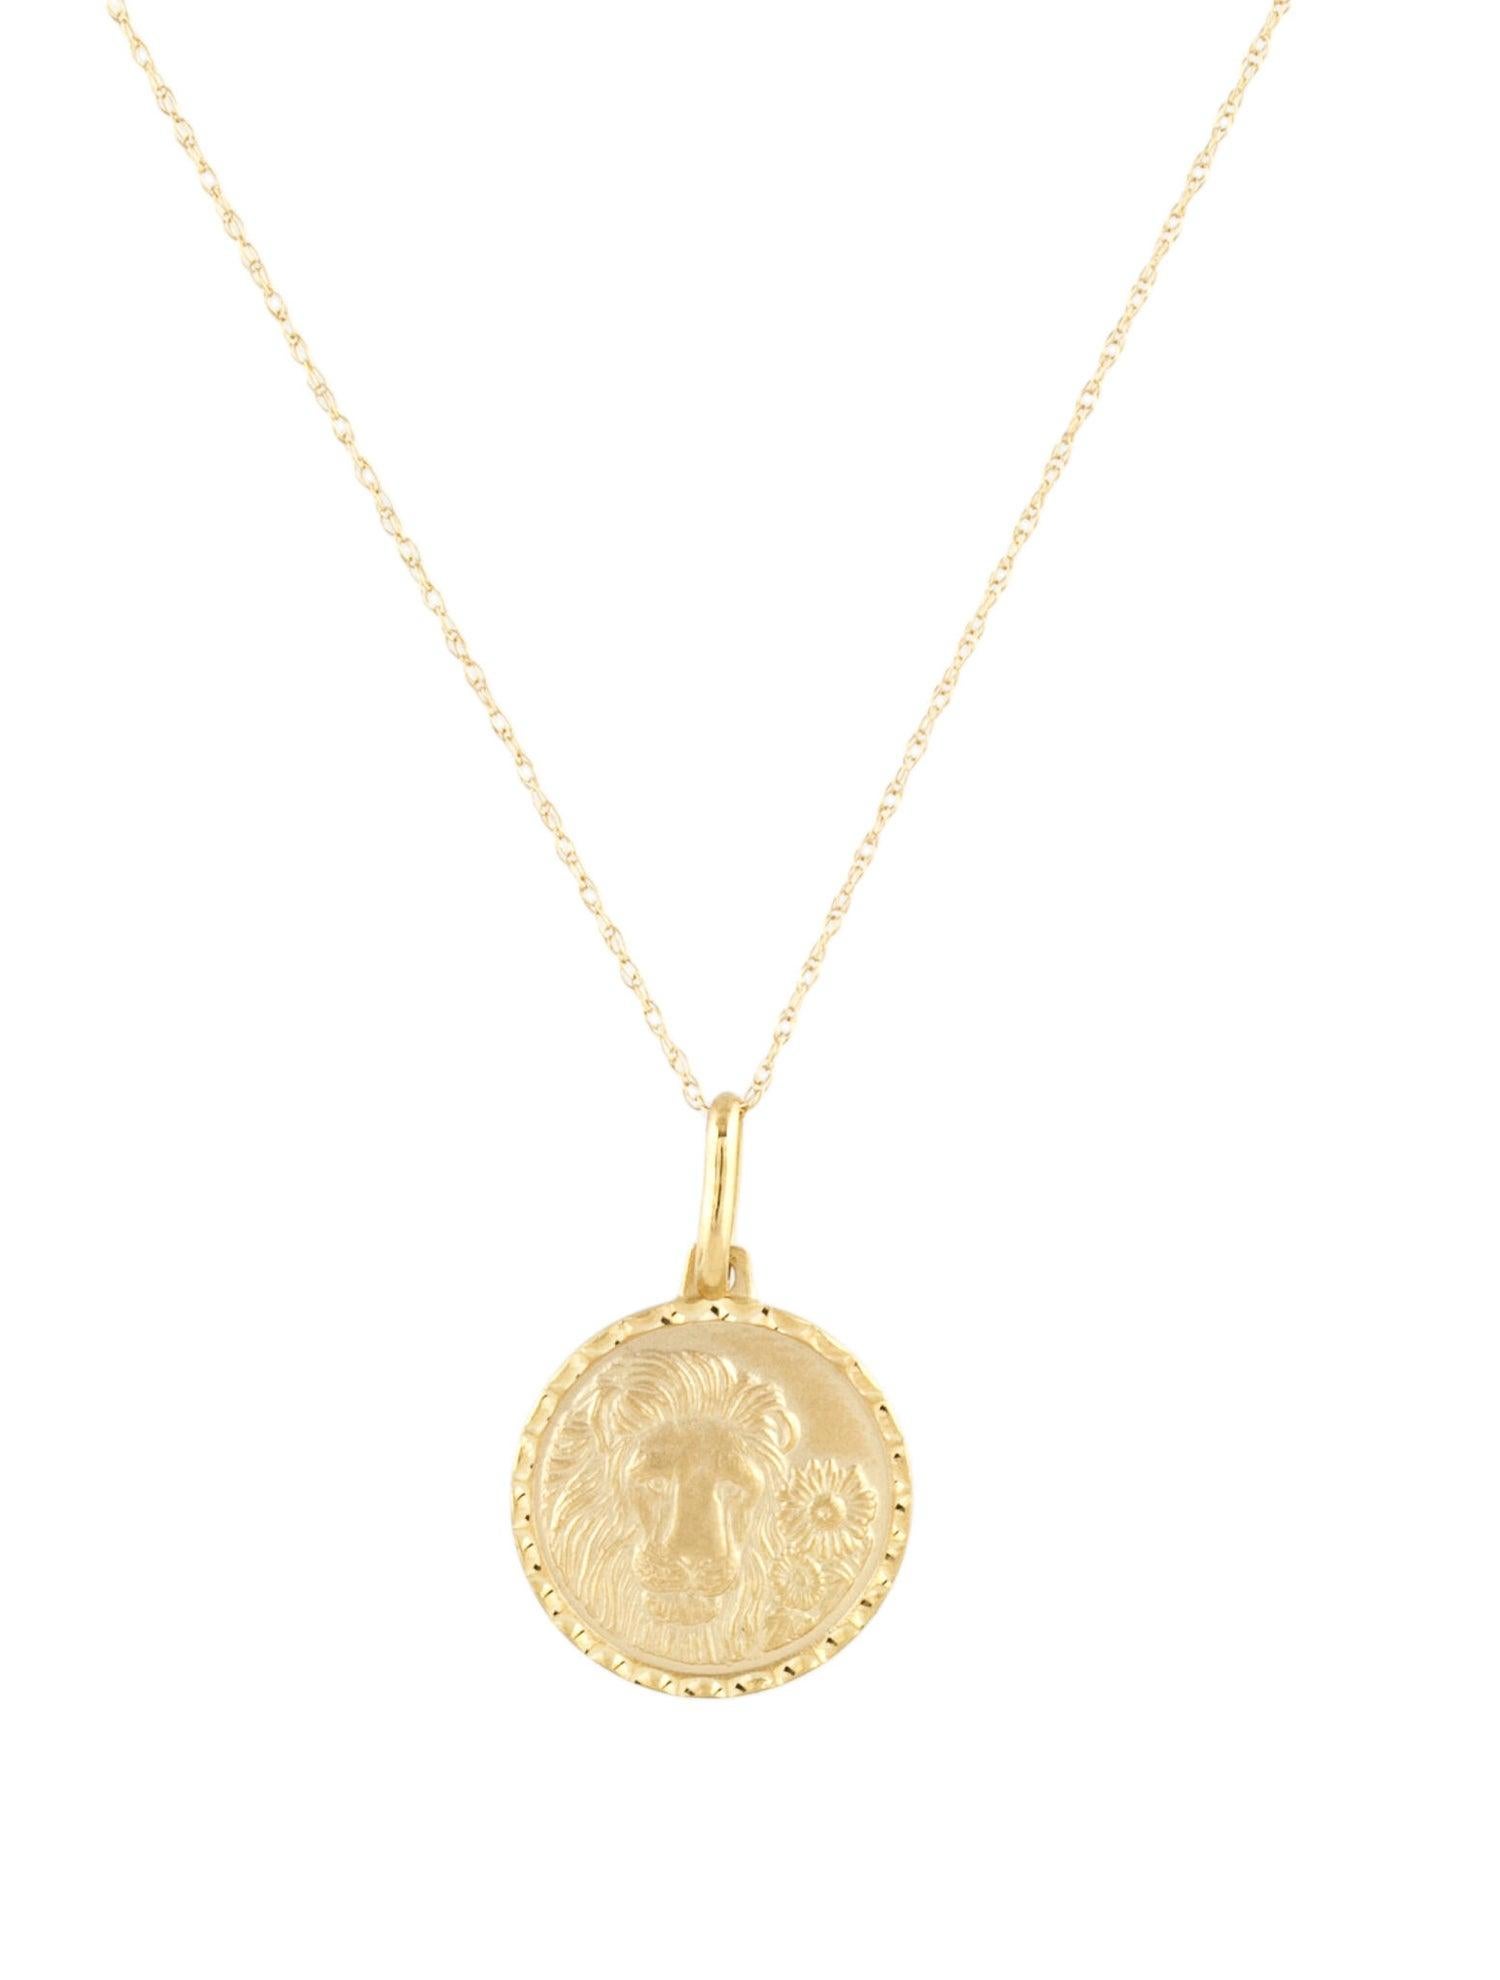 Zodiac Coin Sign: Gold Zodiac Aries, Aquarius, Capricorn, Cancer, Gemini, Leo, Libra, Pisces, Scorpio, Sagittarius, Taurus, Virgo  Necklaces; With an exquisite charm coin pendant that is placed on an adjustable 16-18 inch 14k Gold Chain; our chain